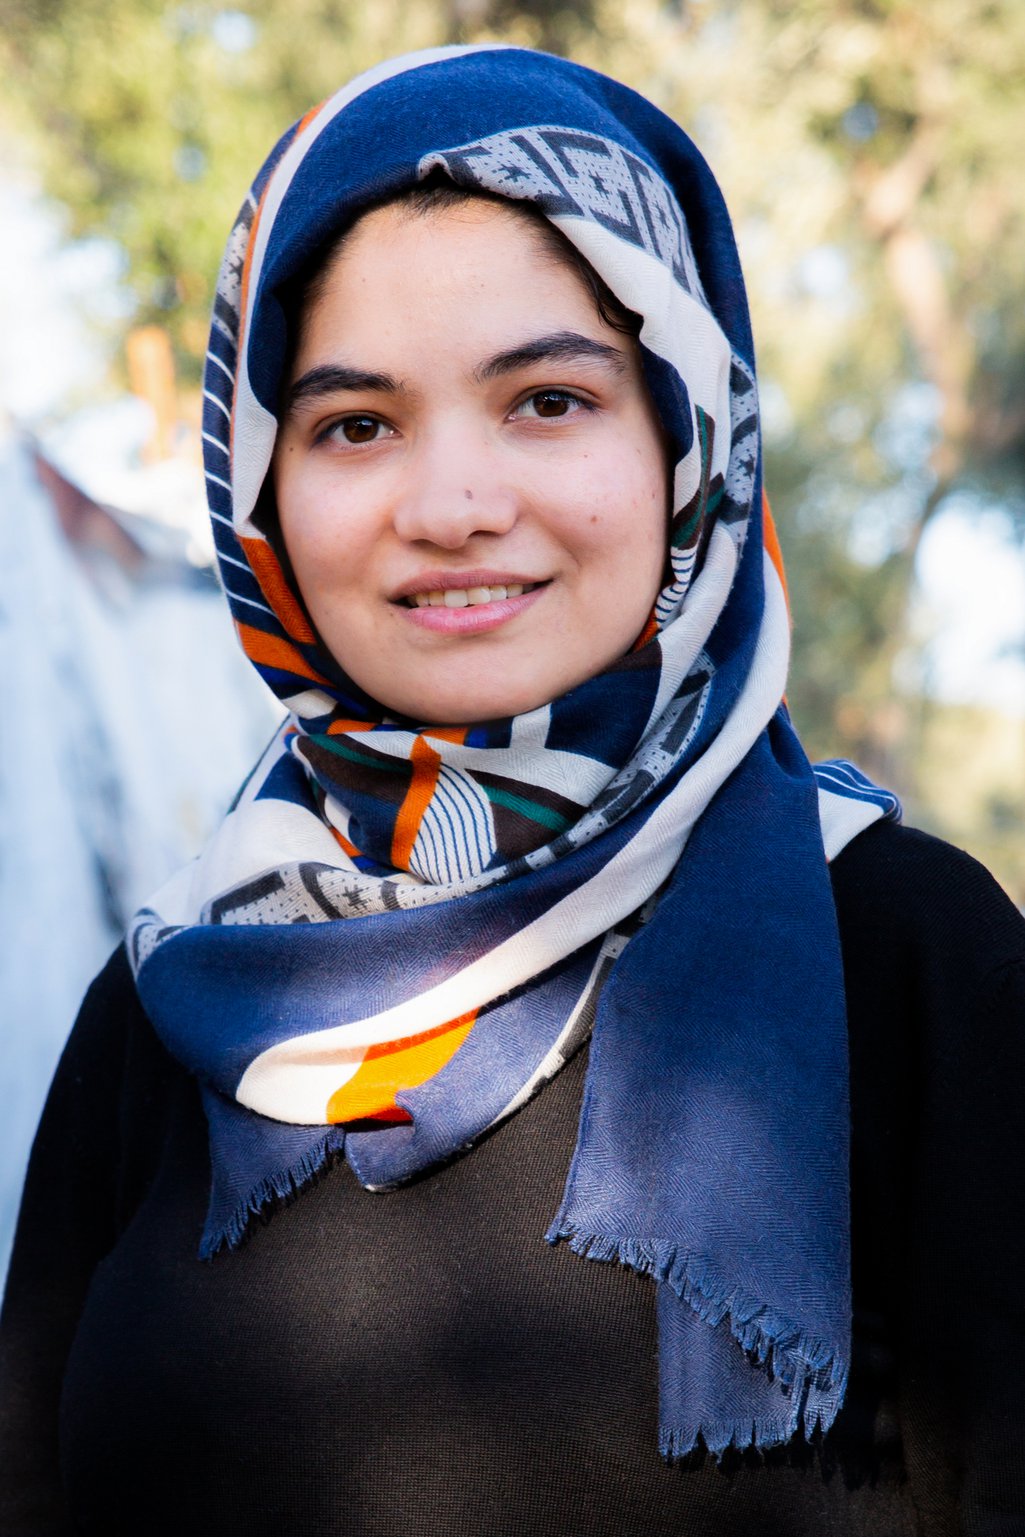 A portrait photo of a young Afghan woman in a headscarf